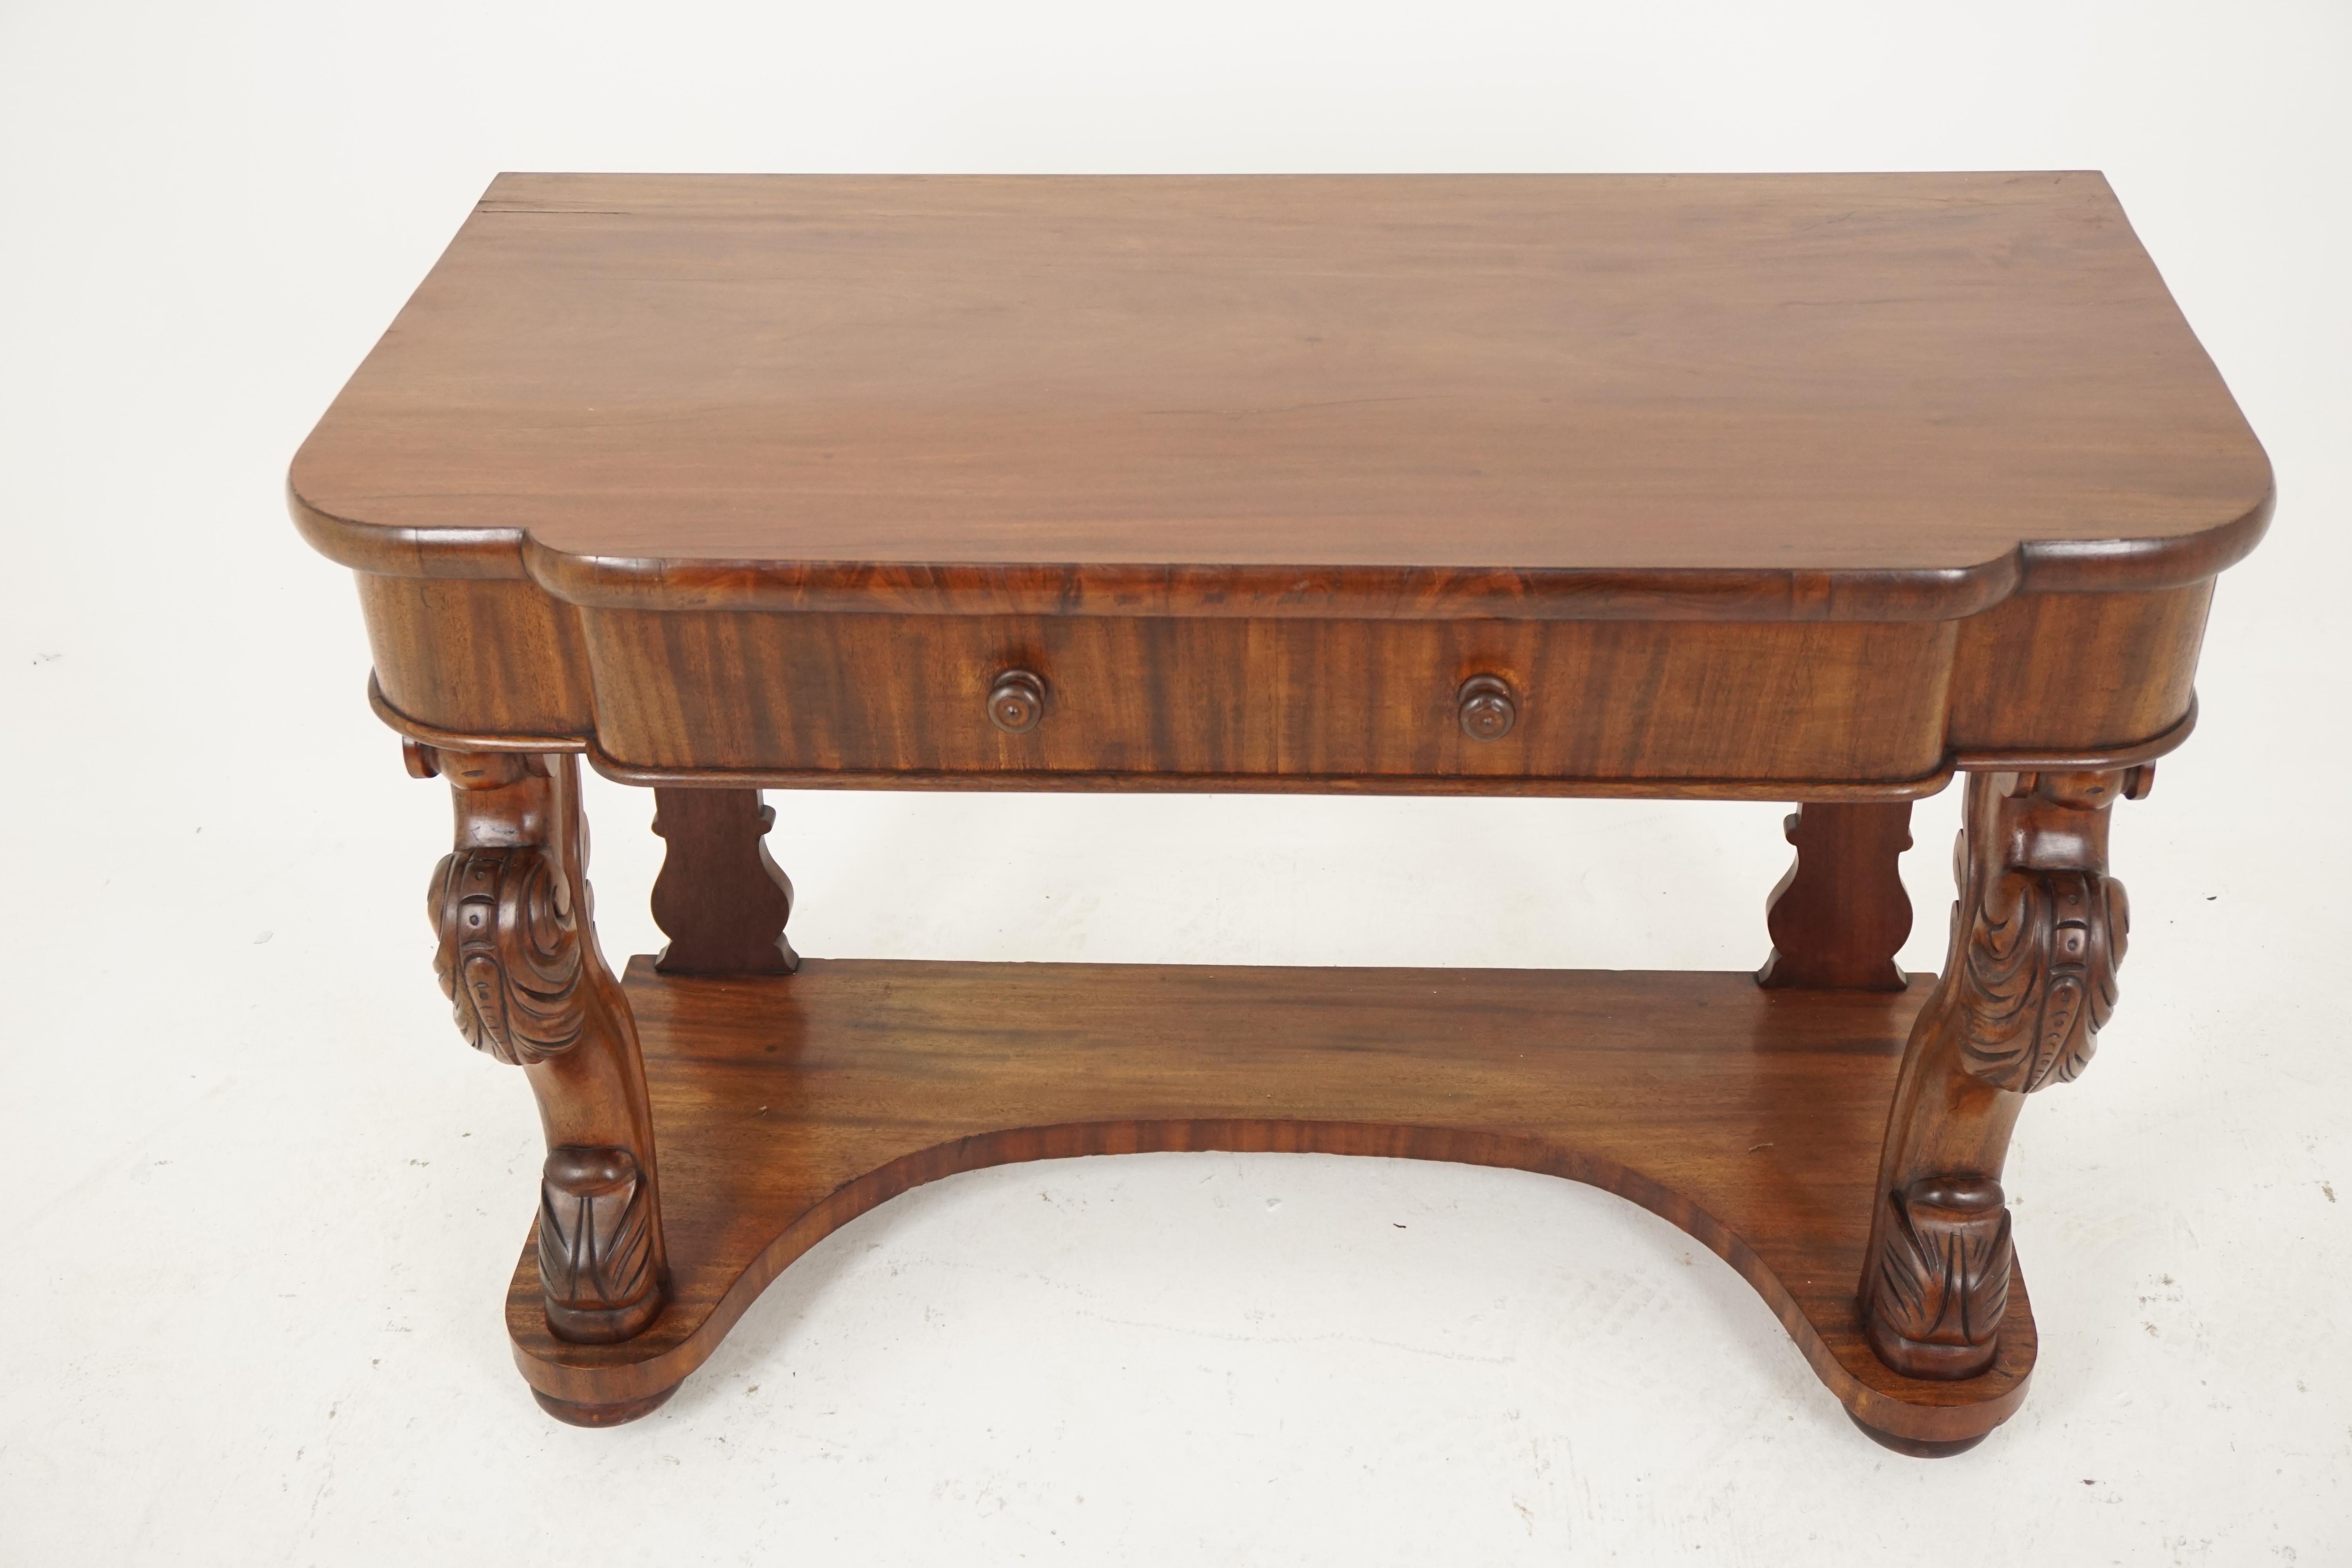 Antique walnut table, Victorian Serpentine front console, hall table, writing table, or server, antique furniture, Scotland 1880, B1804,

Scotland, 1880
Solid walnut and Venners
Original finish
Moulded serpentine top
Fake drawer underneath